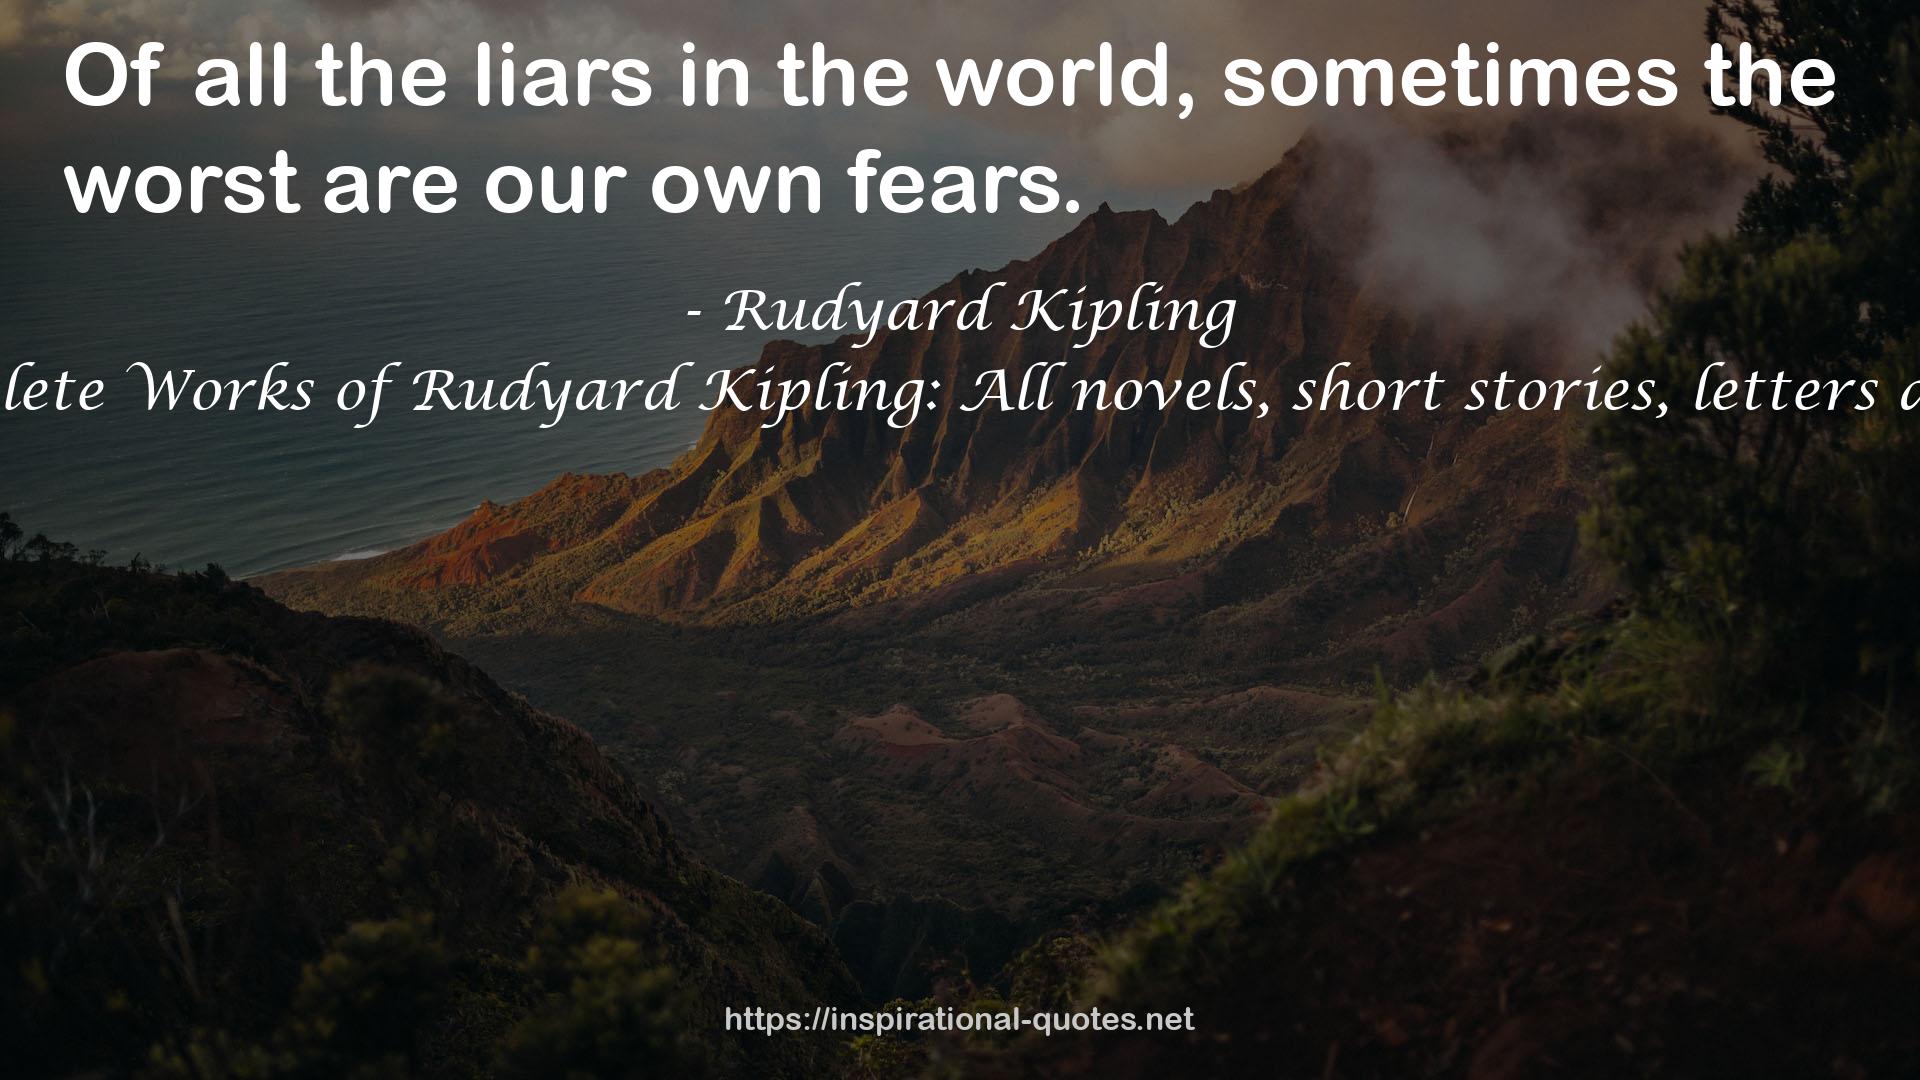 The Complete Works of Rudyard Kipling: All novels, short stories, letters and poems QUOTES